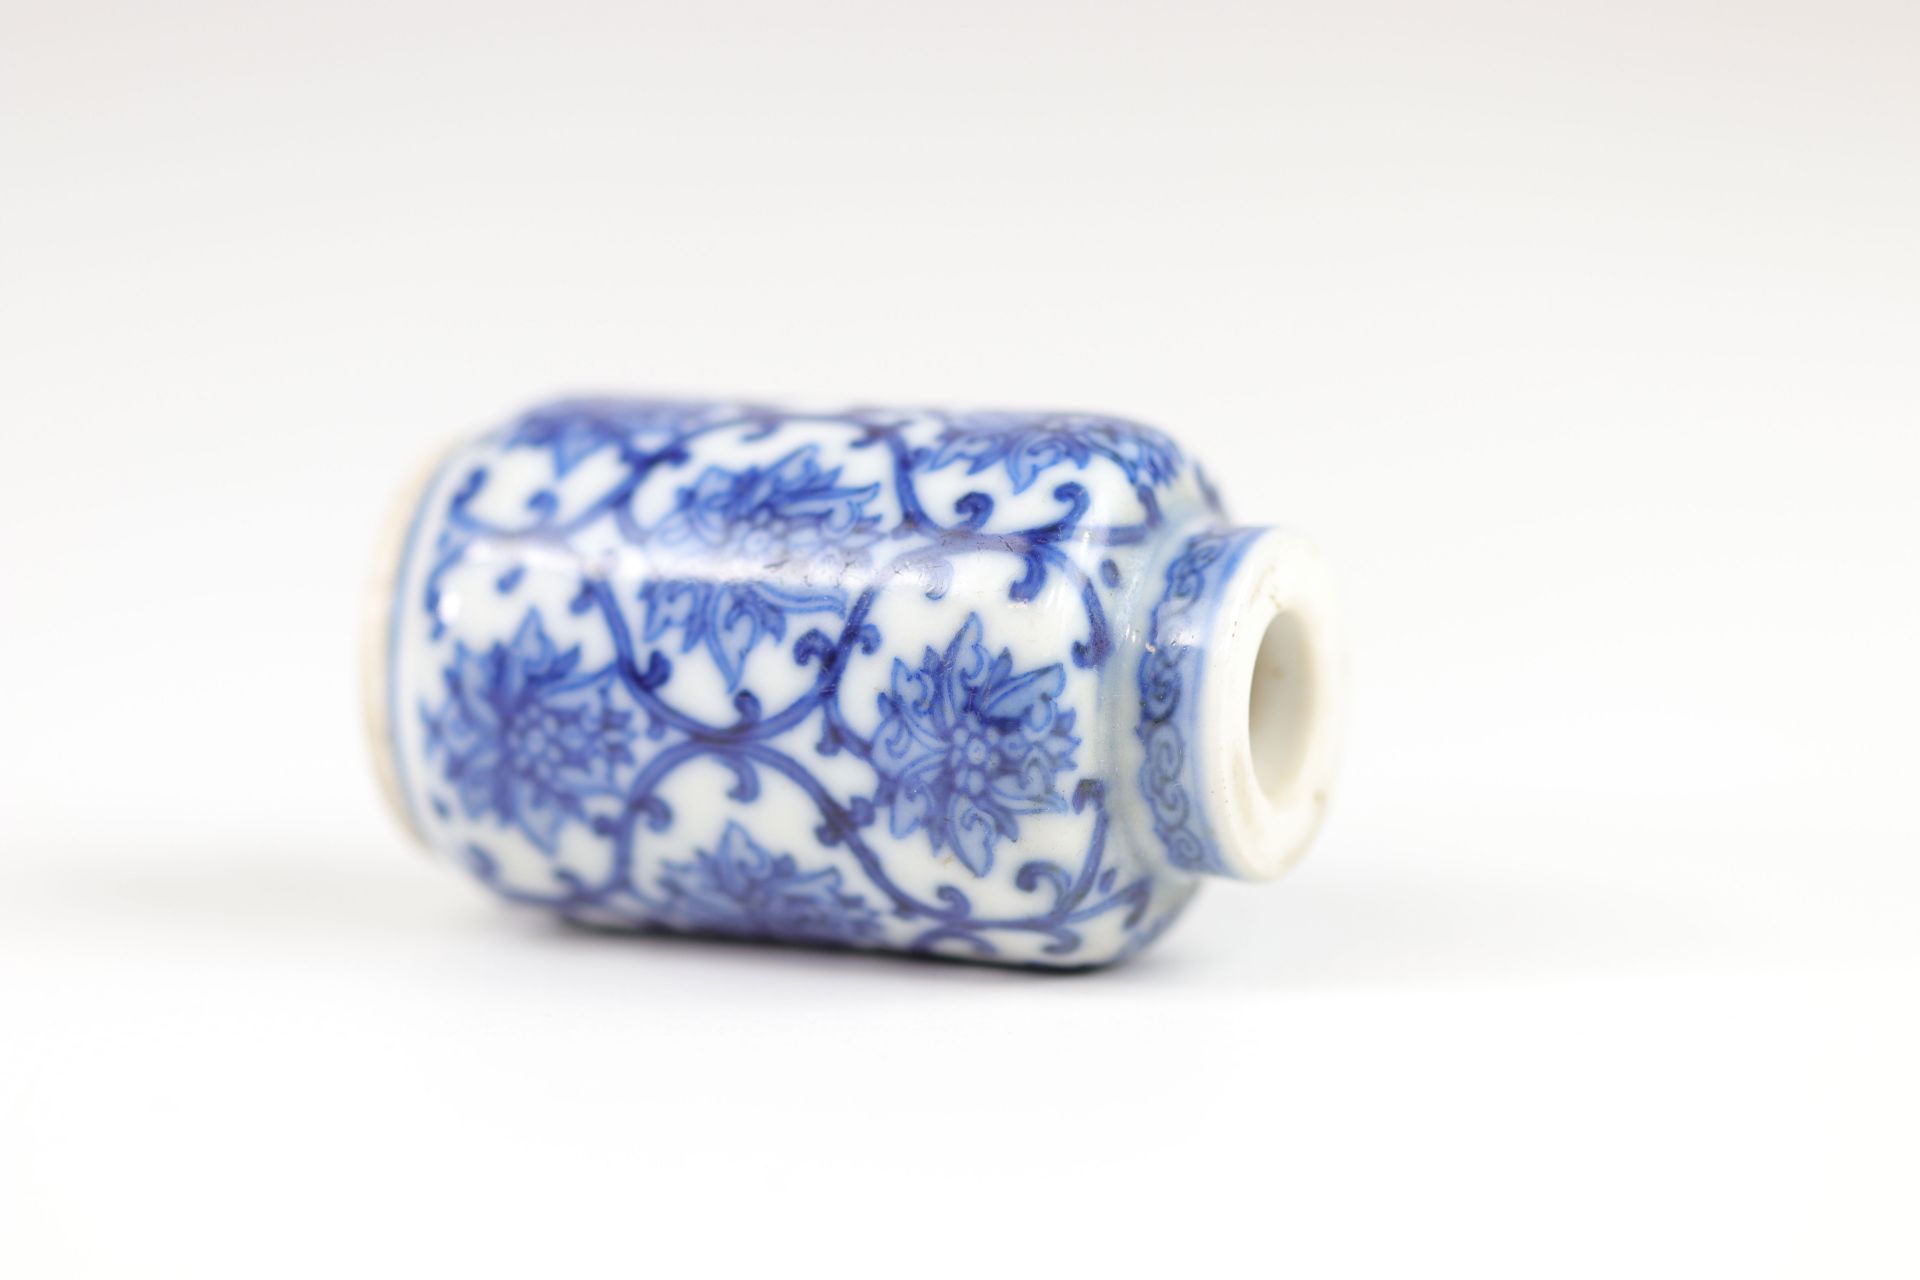 China blanc-bleu porcelain snuff box with floral decoration brand under the piece - Image 4 of 5